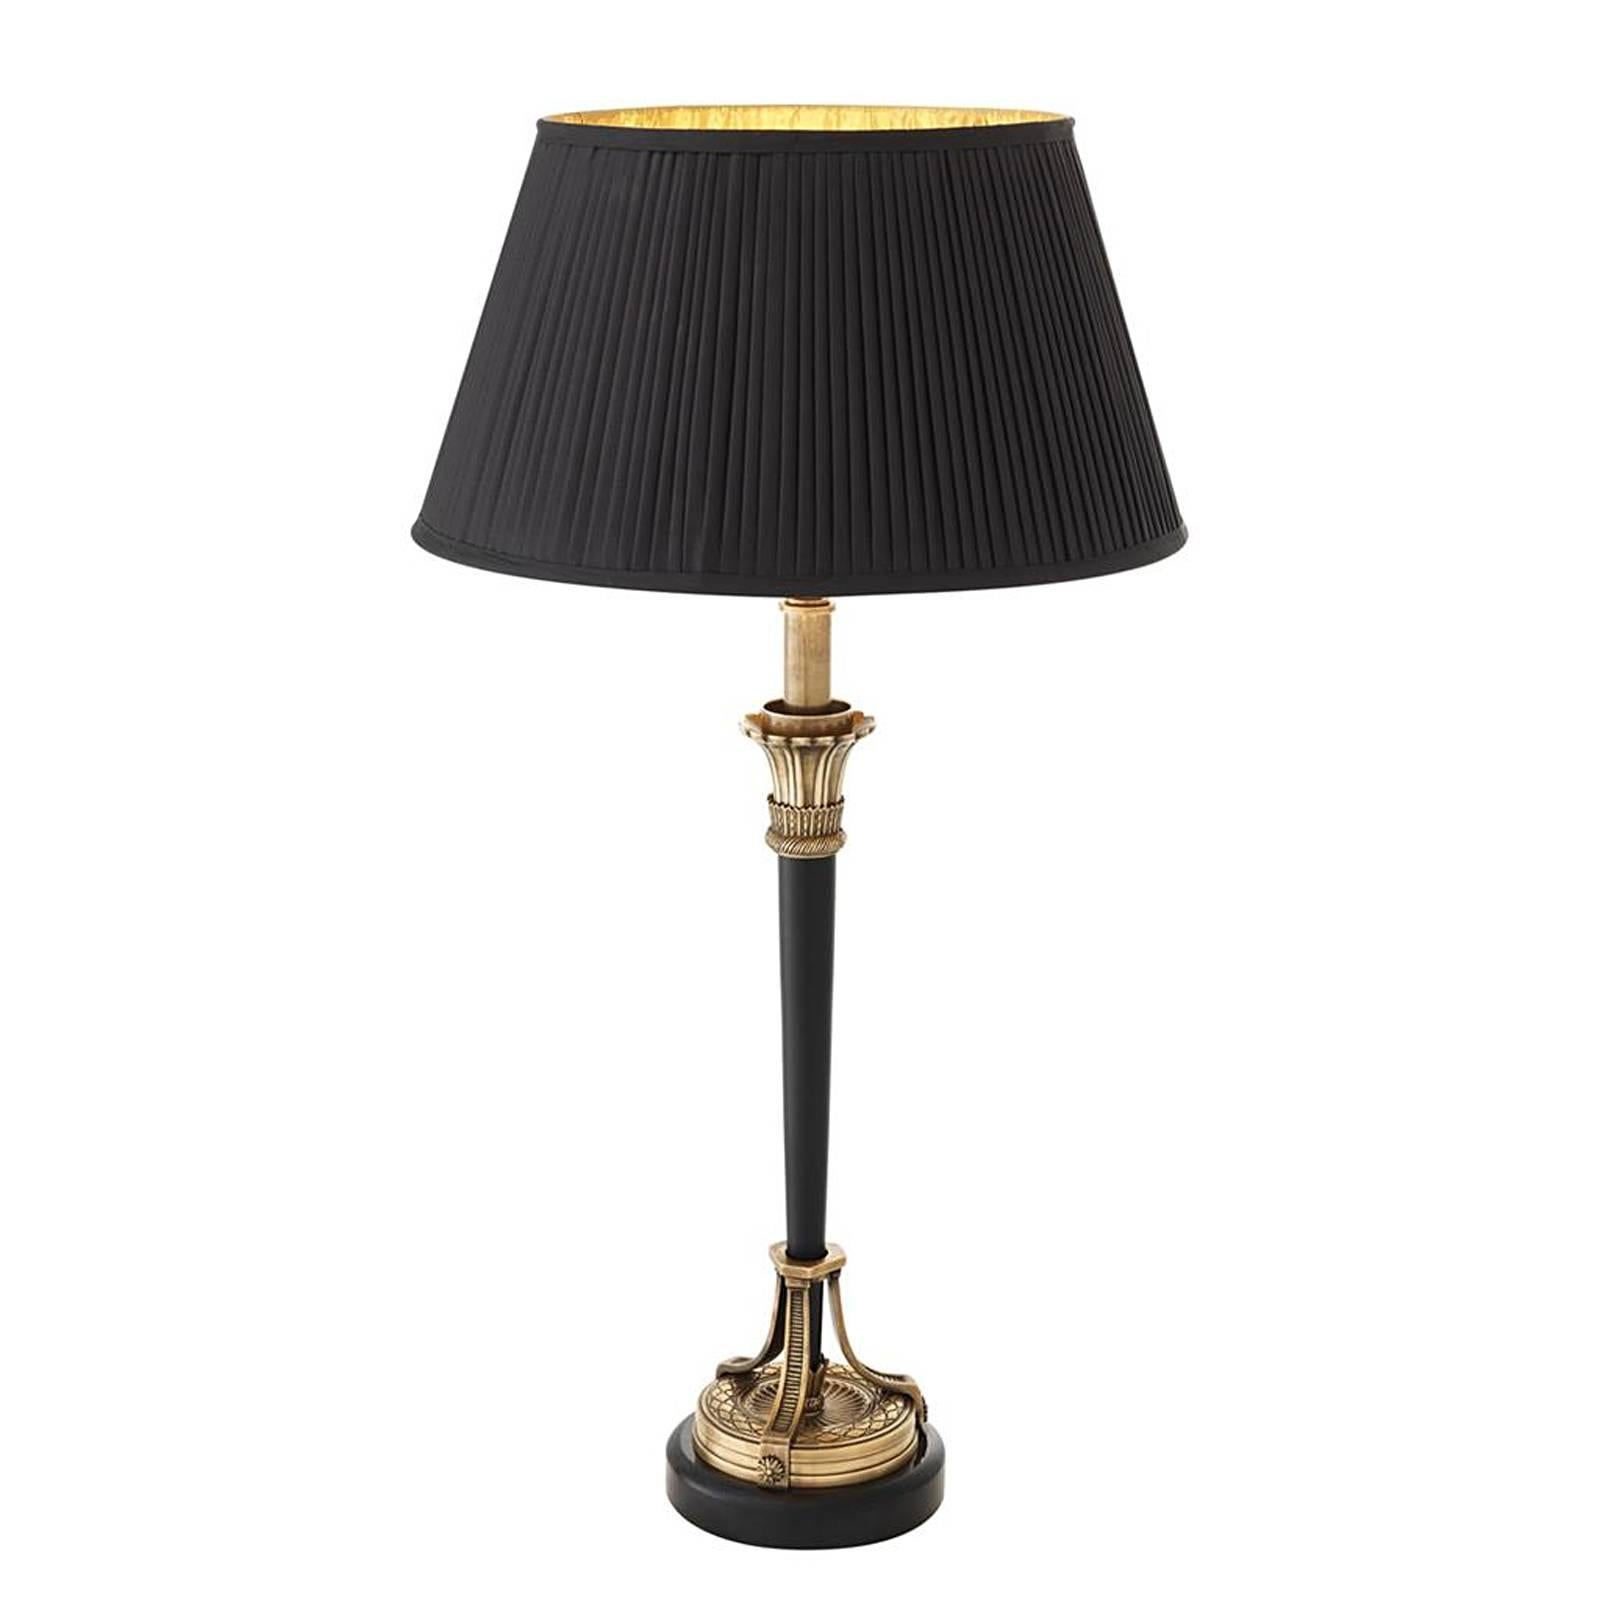 Table lamp Particulier with details in vintage brass finish.
Black finish structure. On black granite base. Including
black pleated shade. 1 bulb lamp holder type E27, max
40 Watt. Bulb not included.
Also available with red pleated shade.
